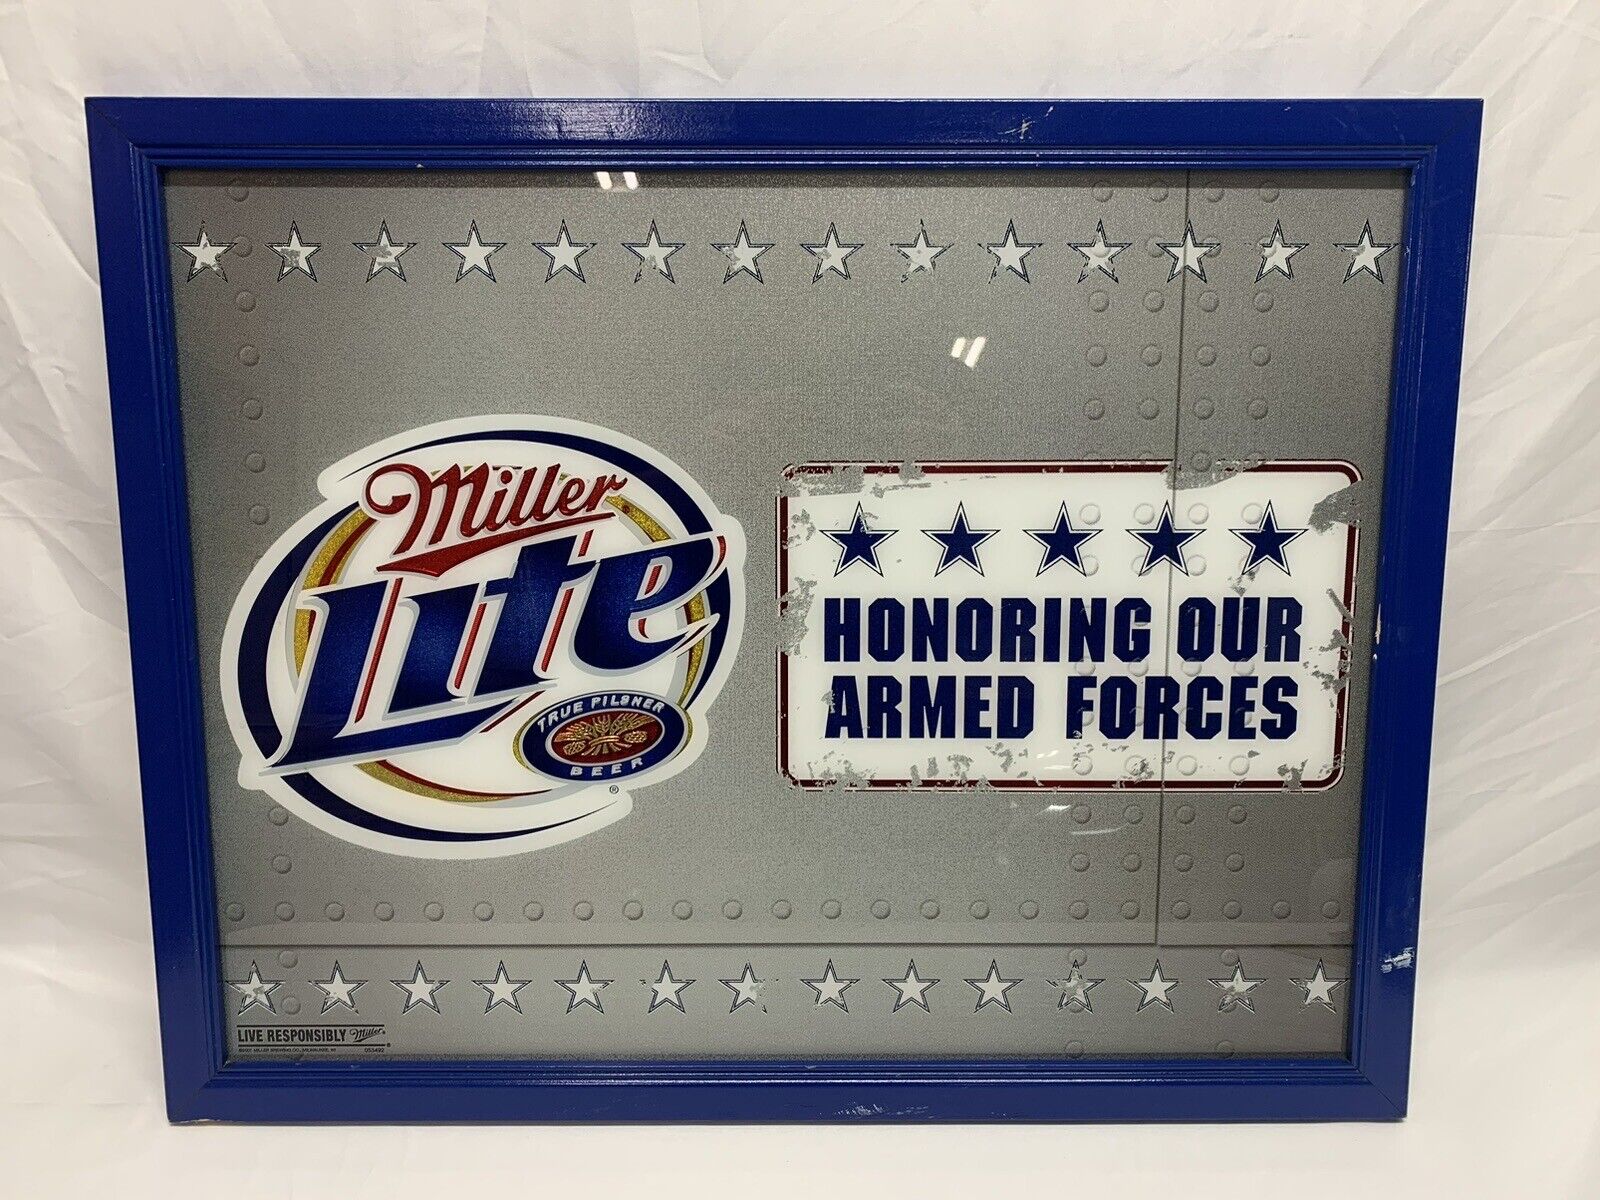 2007 Miller Lite Reflective Plaque Honoring Our Armed Forces Beer Sign Mirror